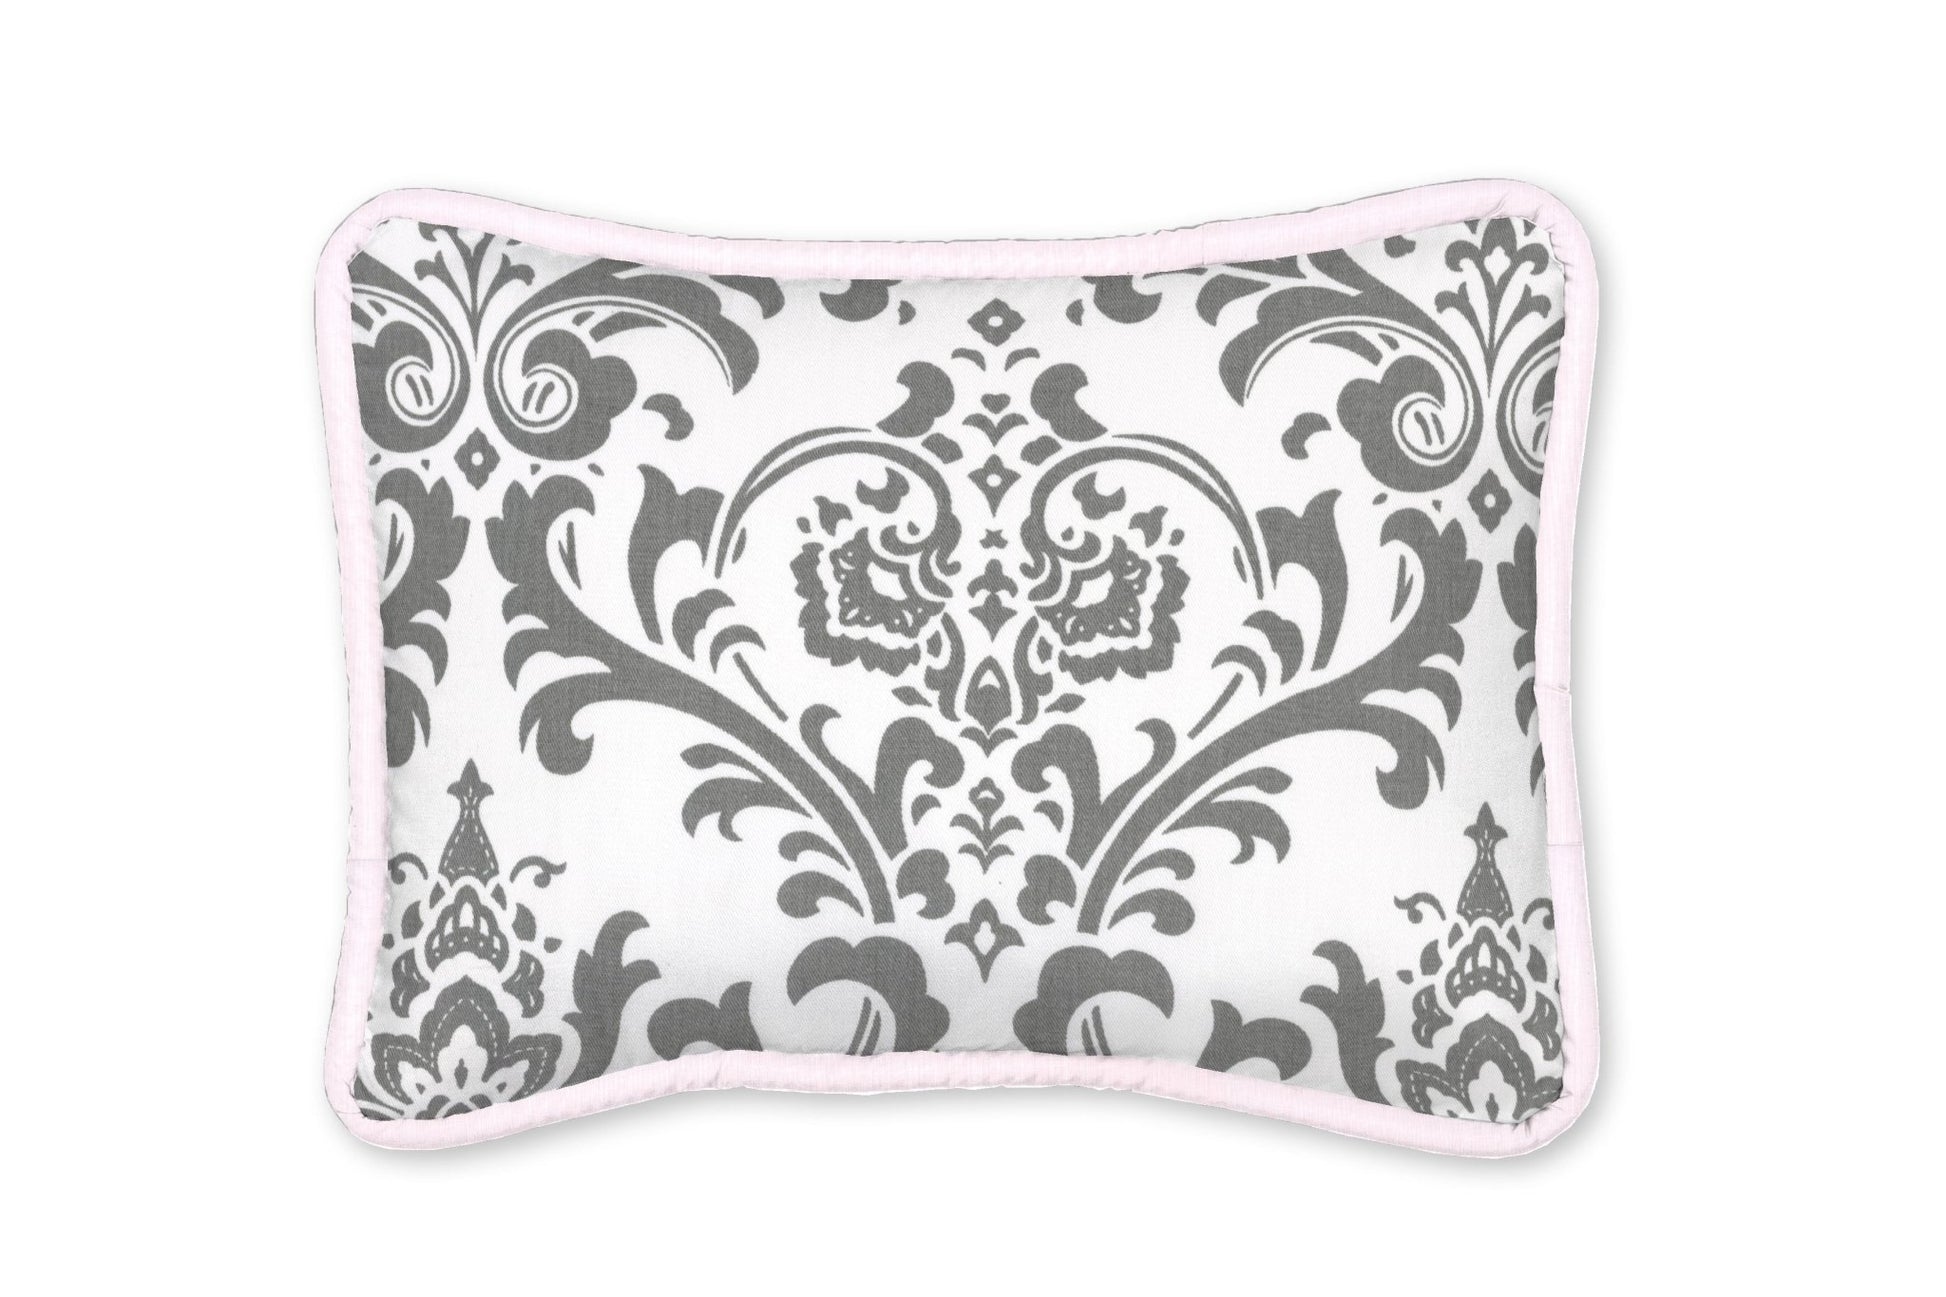 Pink and Gray Traditions Decorative Pillow - New Arrivals Inc